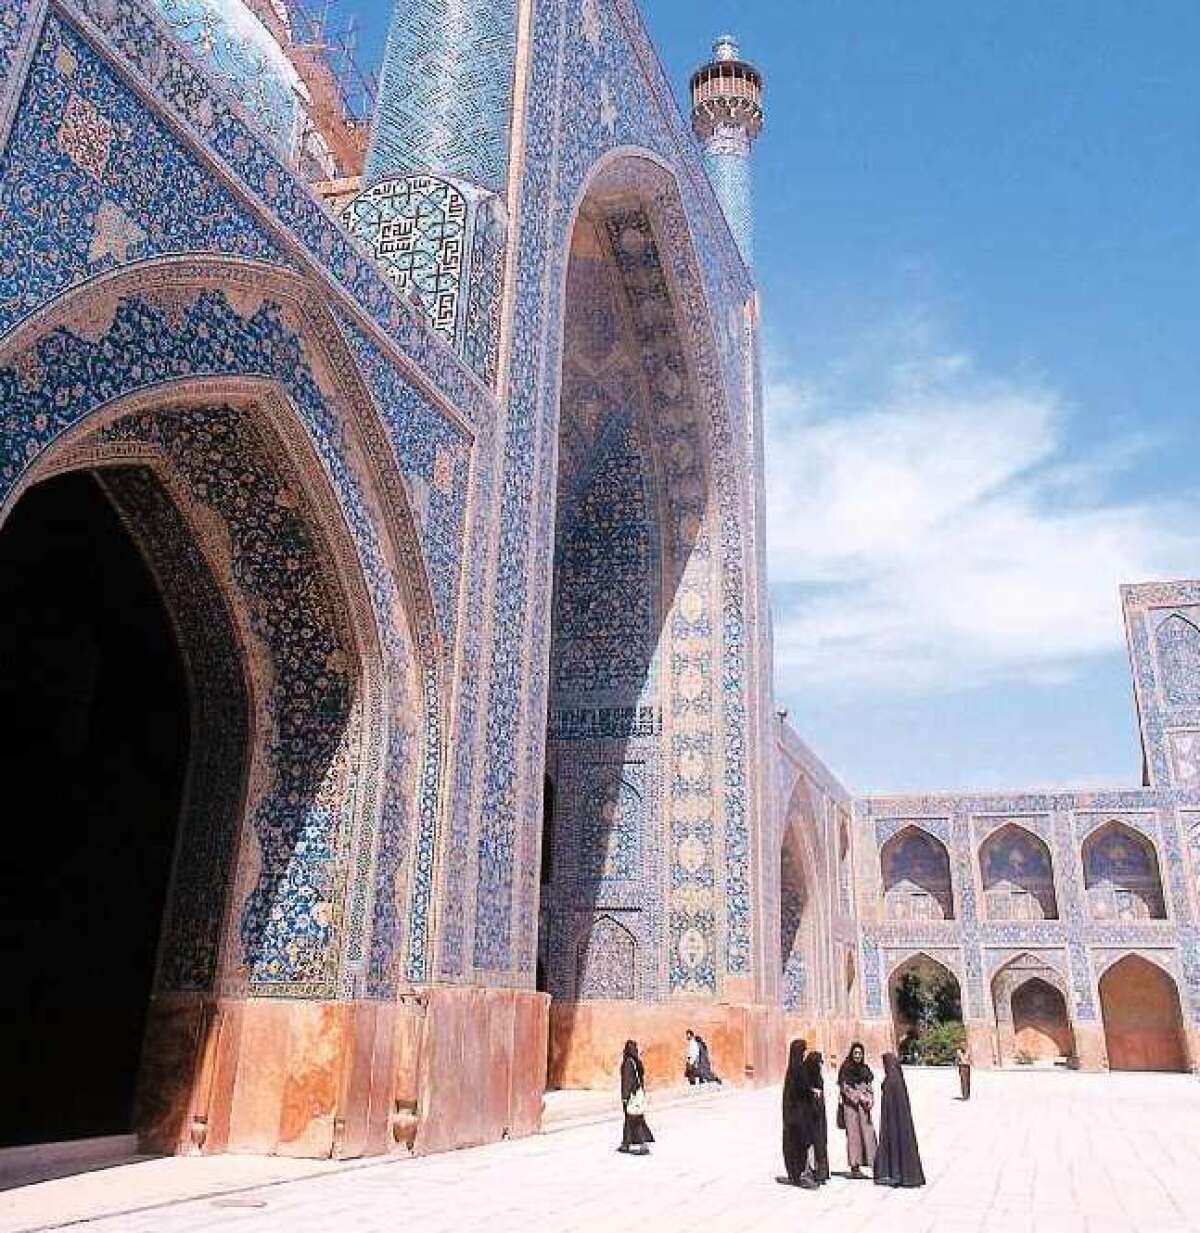 The 17th-century Imam Mosque is one among many architectural wonders in Isfahan, Iran. Photo taken in 1998.